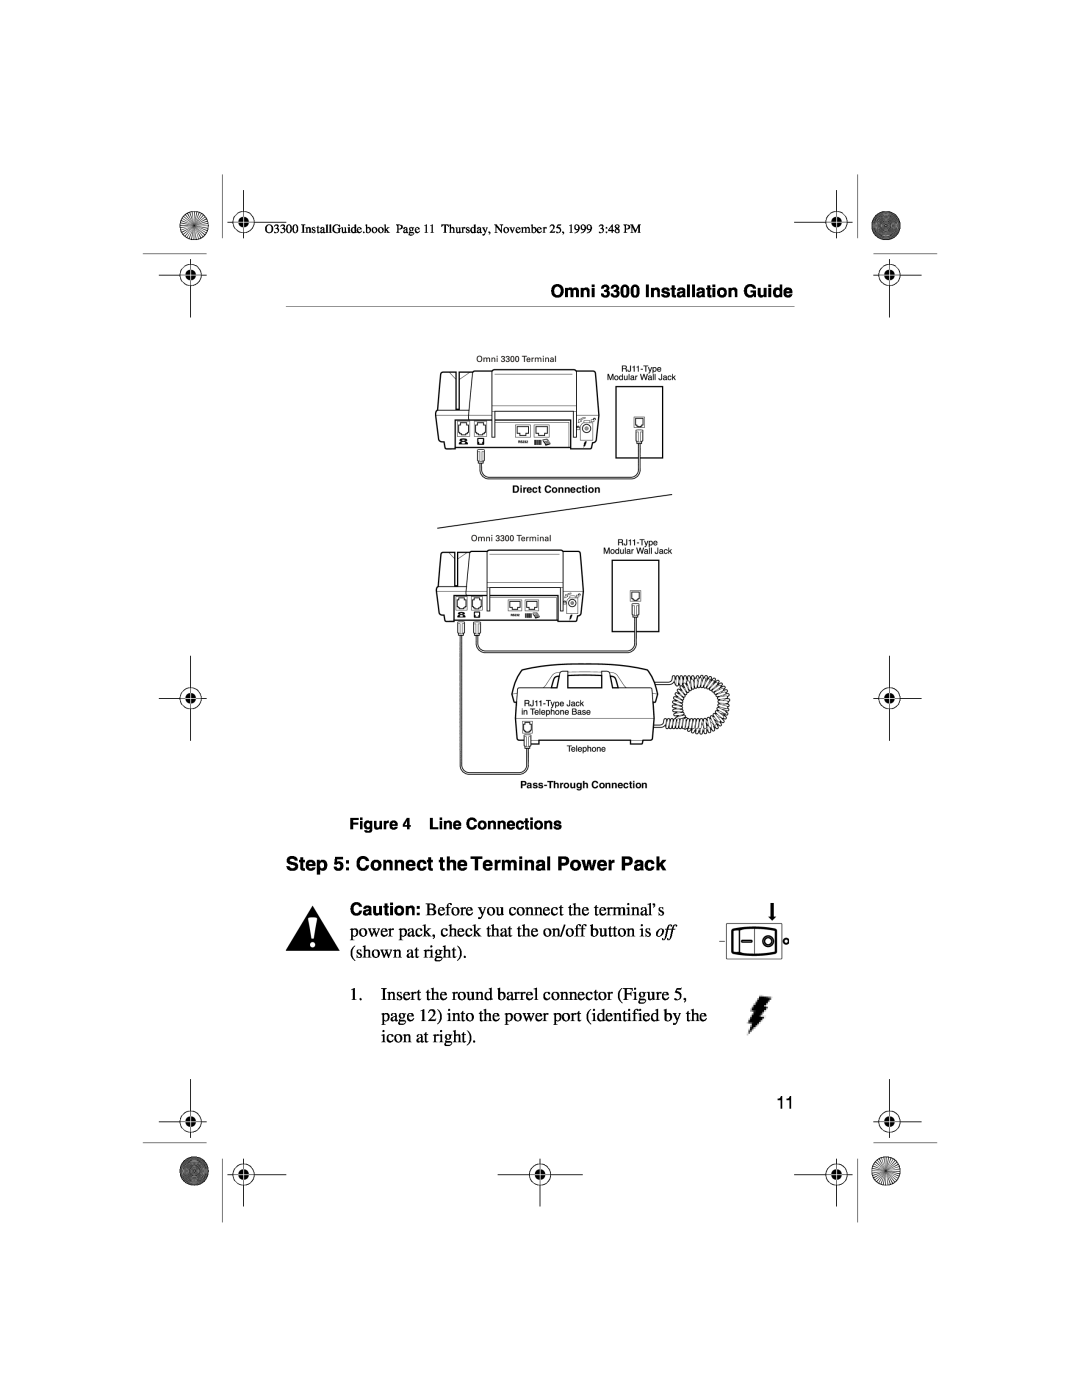 VeriFone manual Connect the Terminal Power Pack, Omni 3300 Installation Guide, Line Connections 